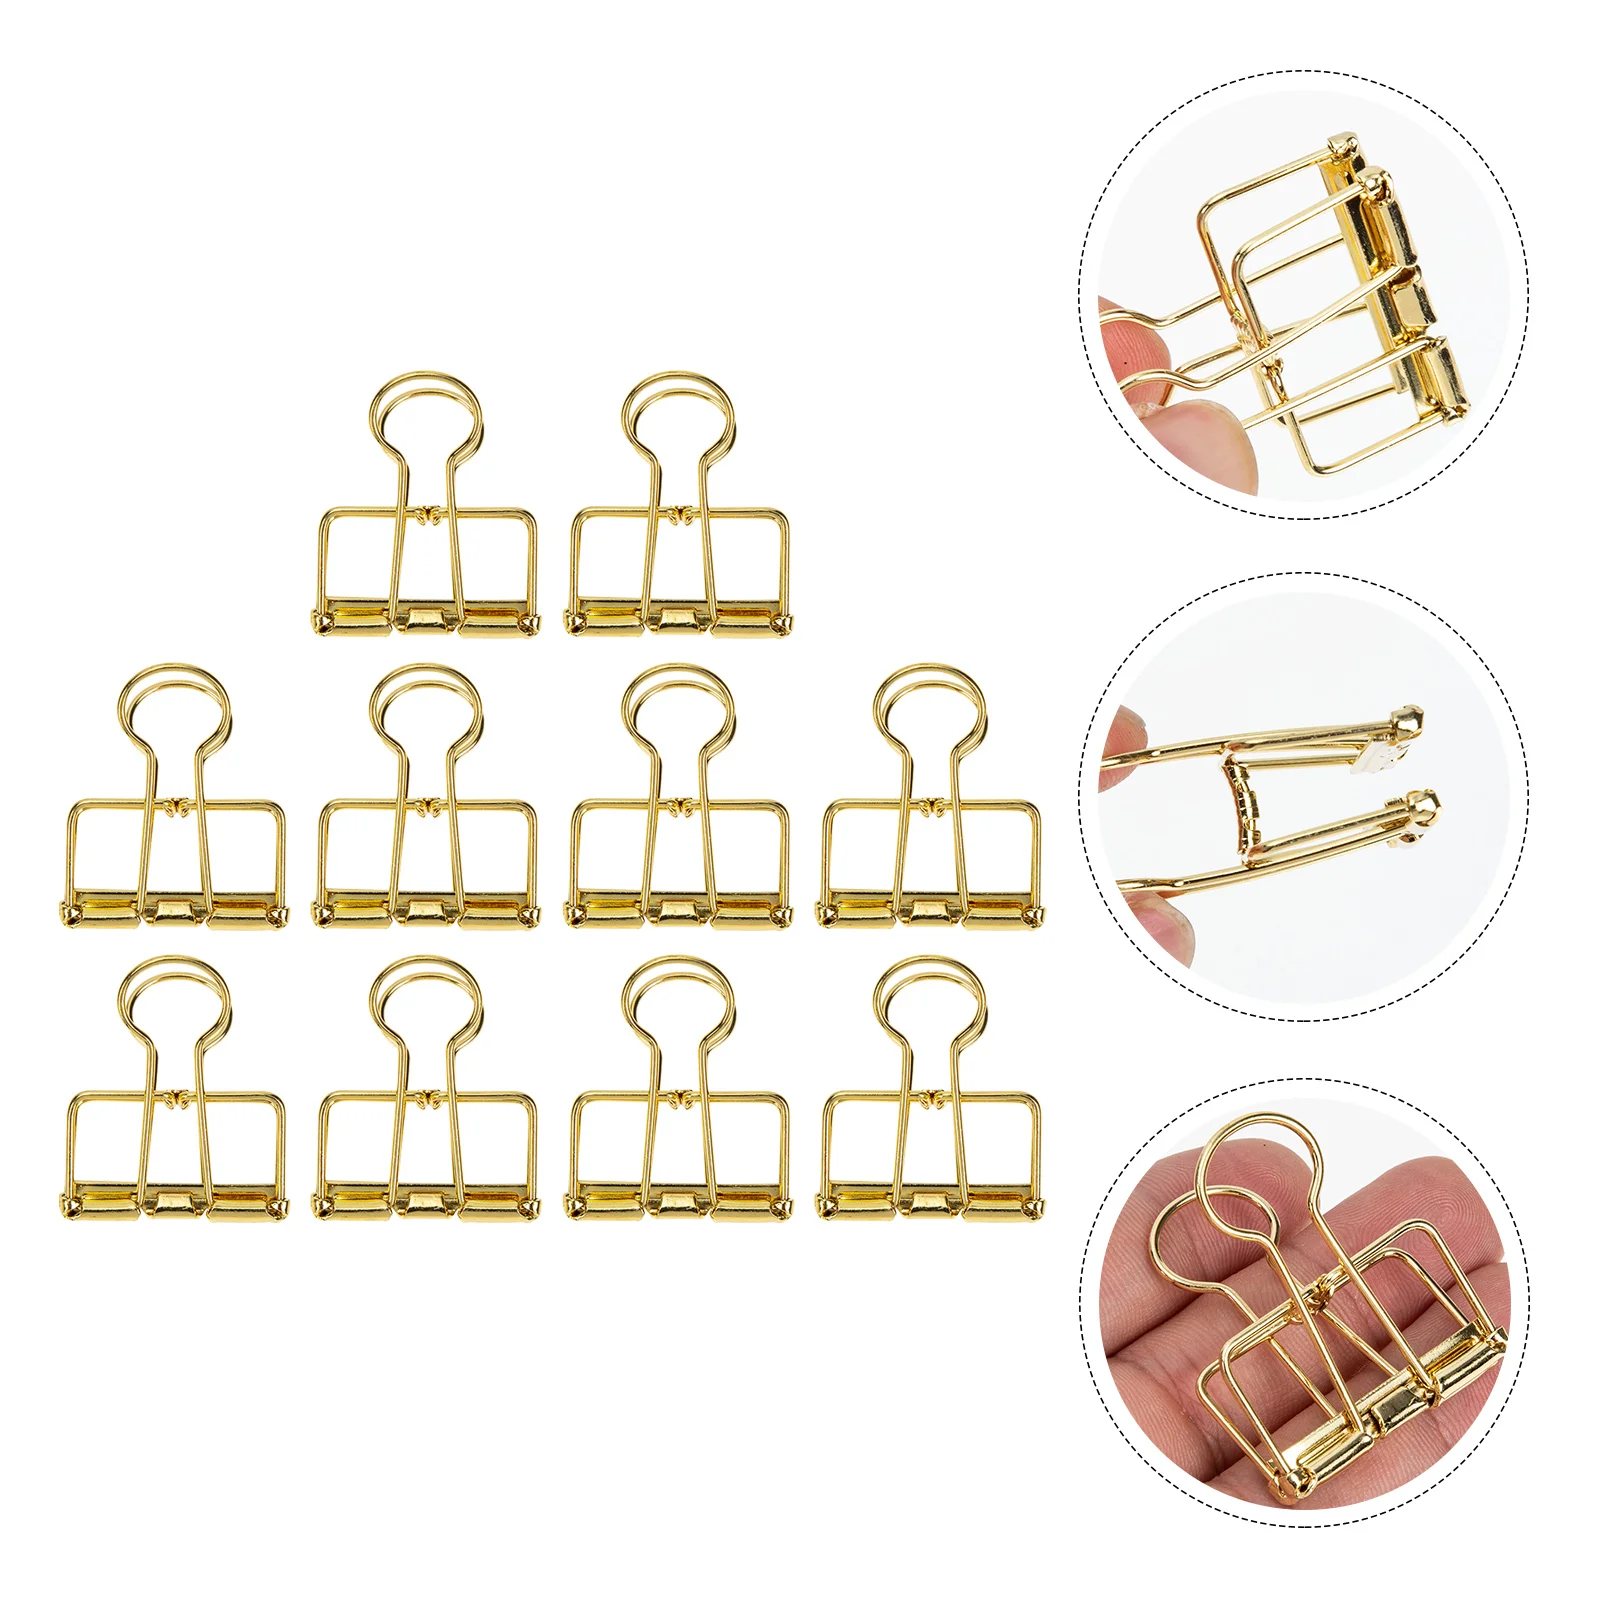 

Gold Dovetail Clip Stainless Steel Paper Clips Multi-function Binder Clamps Delicate File Exquisite Mini Binder Clips